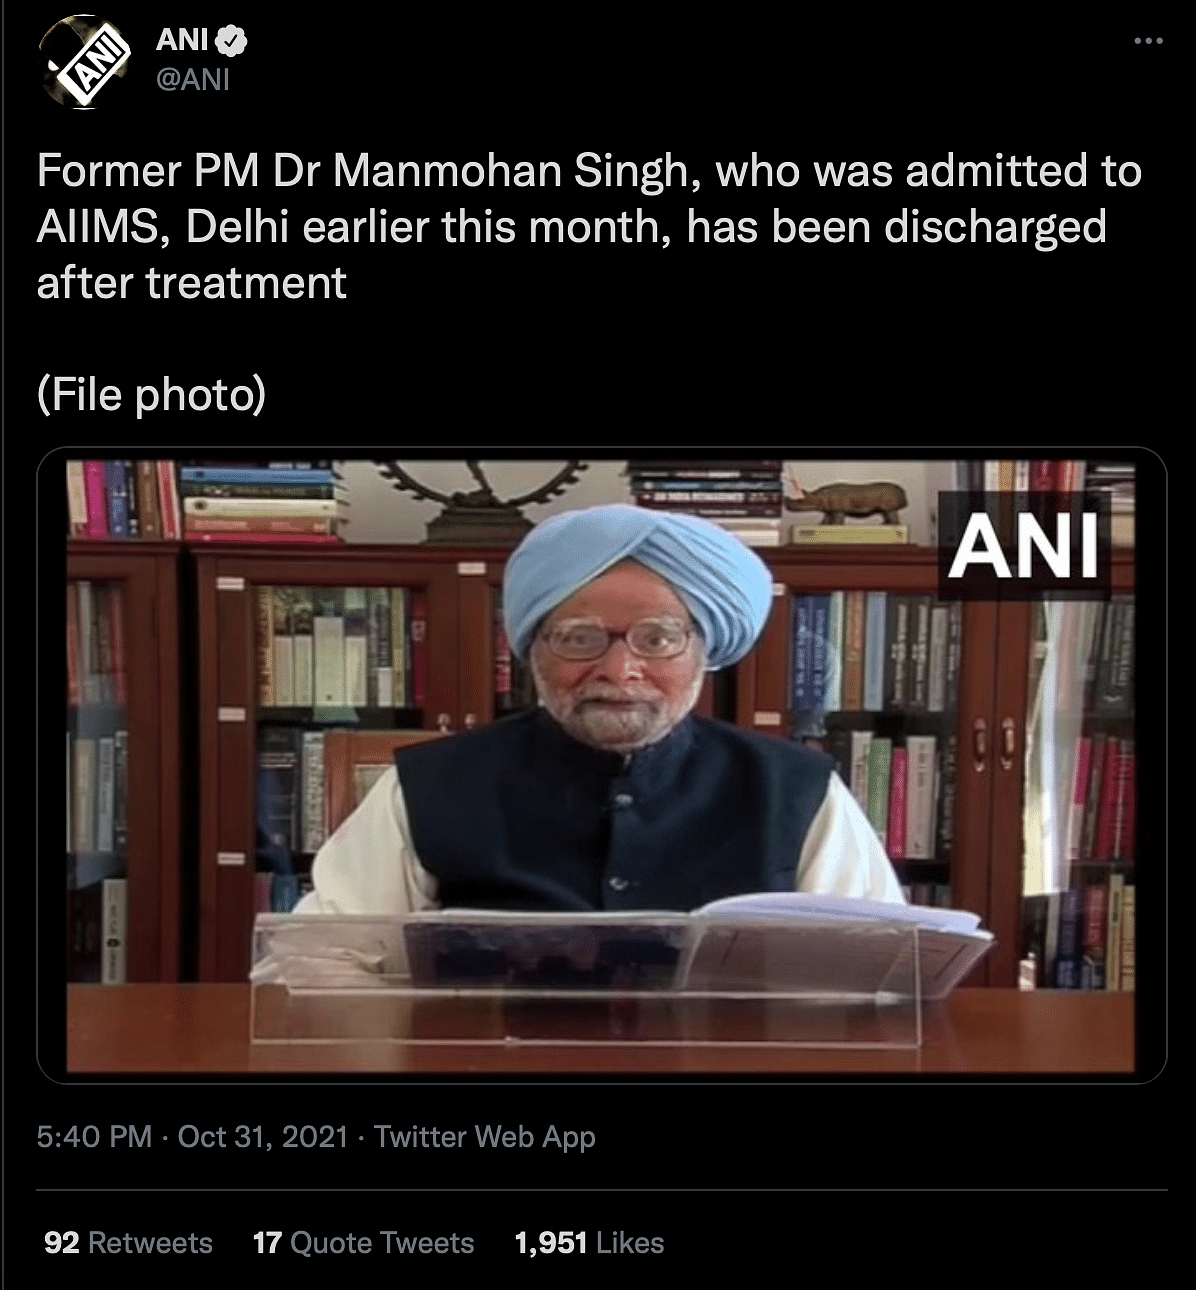 The former PM was admitted to AIIMS in Delhi on 13 October due to fever and weakness.